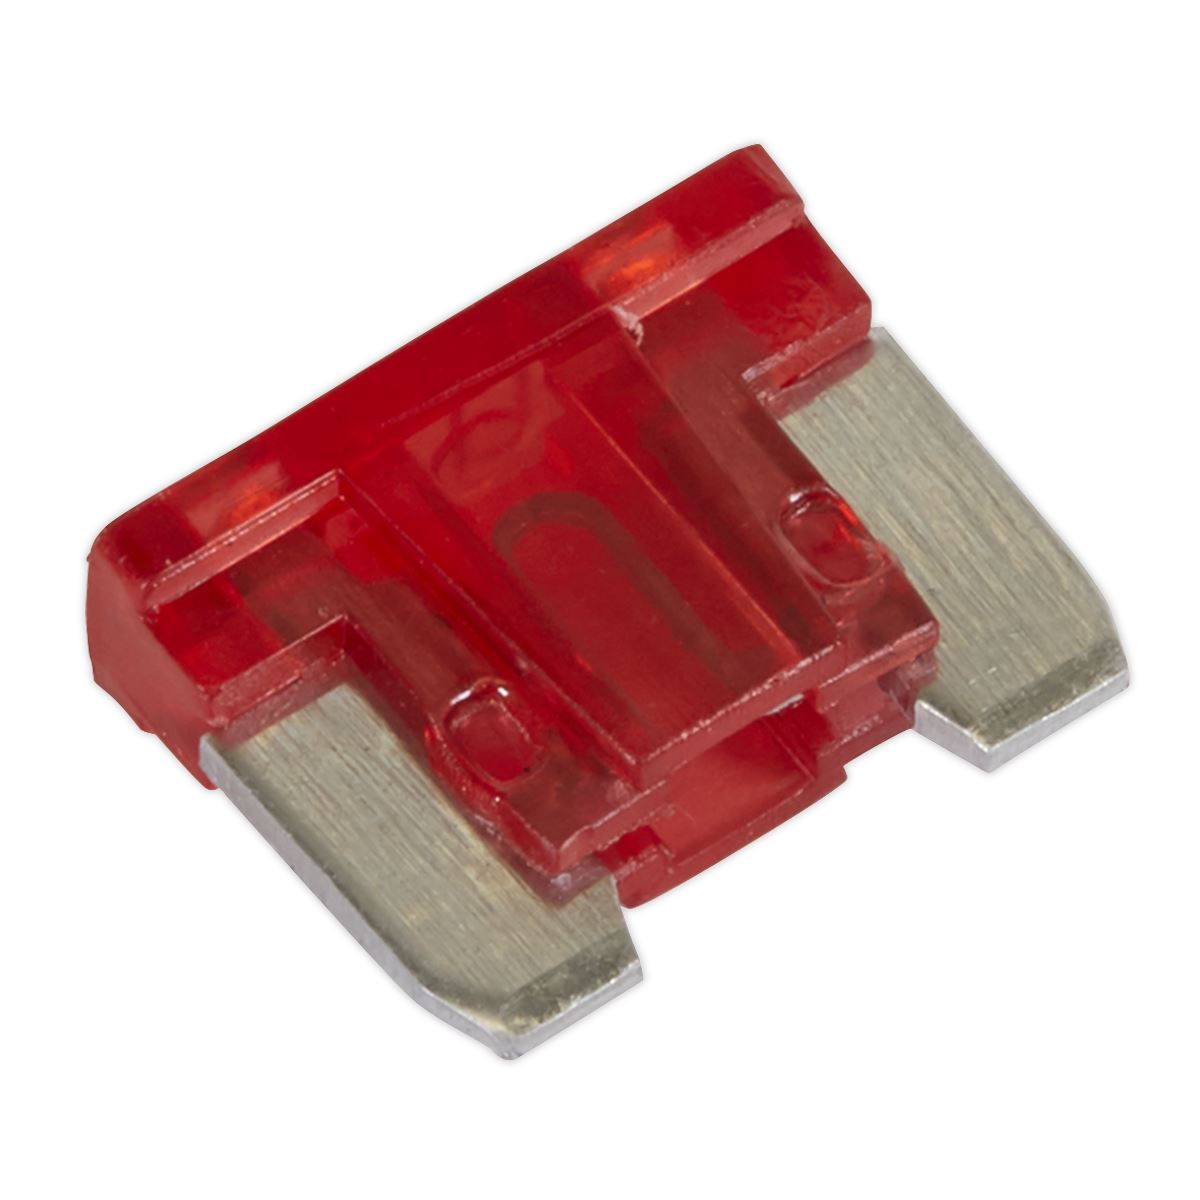 Sealey Automotive MICRO Blade Fuse 10A - Pack of 50